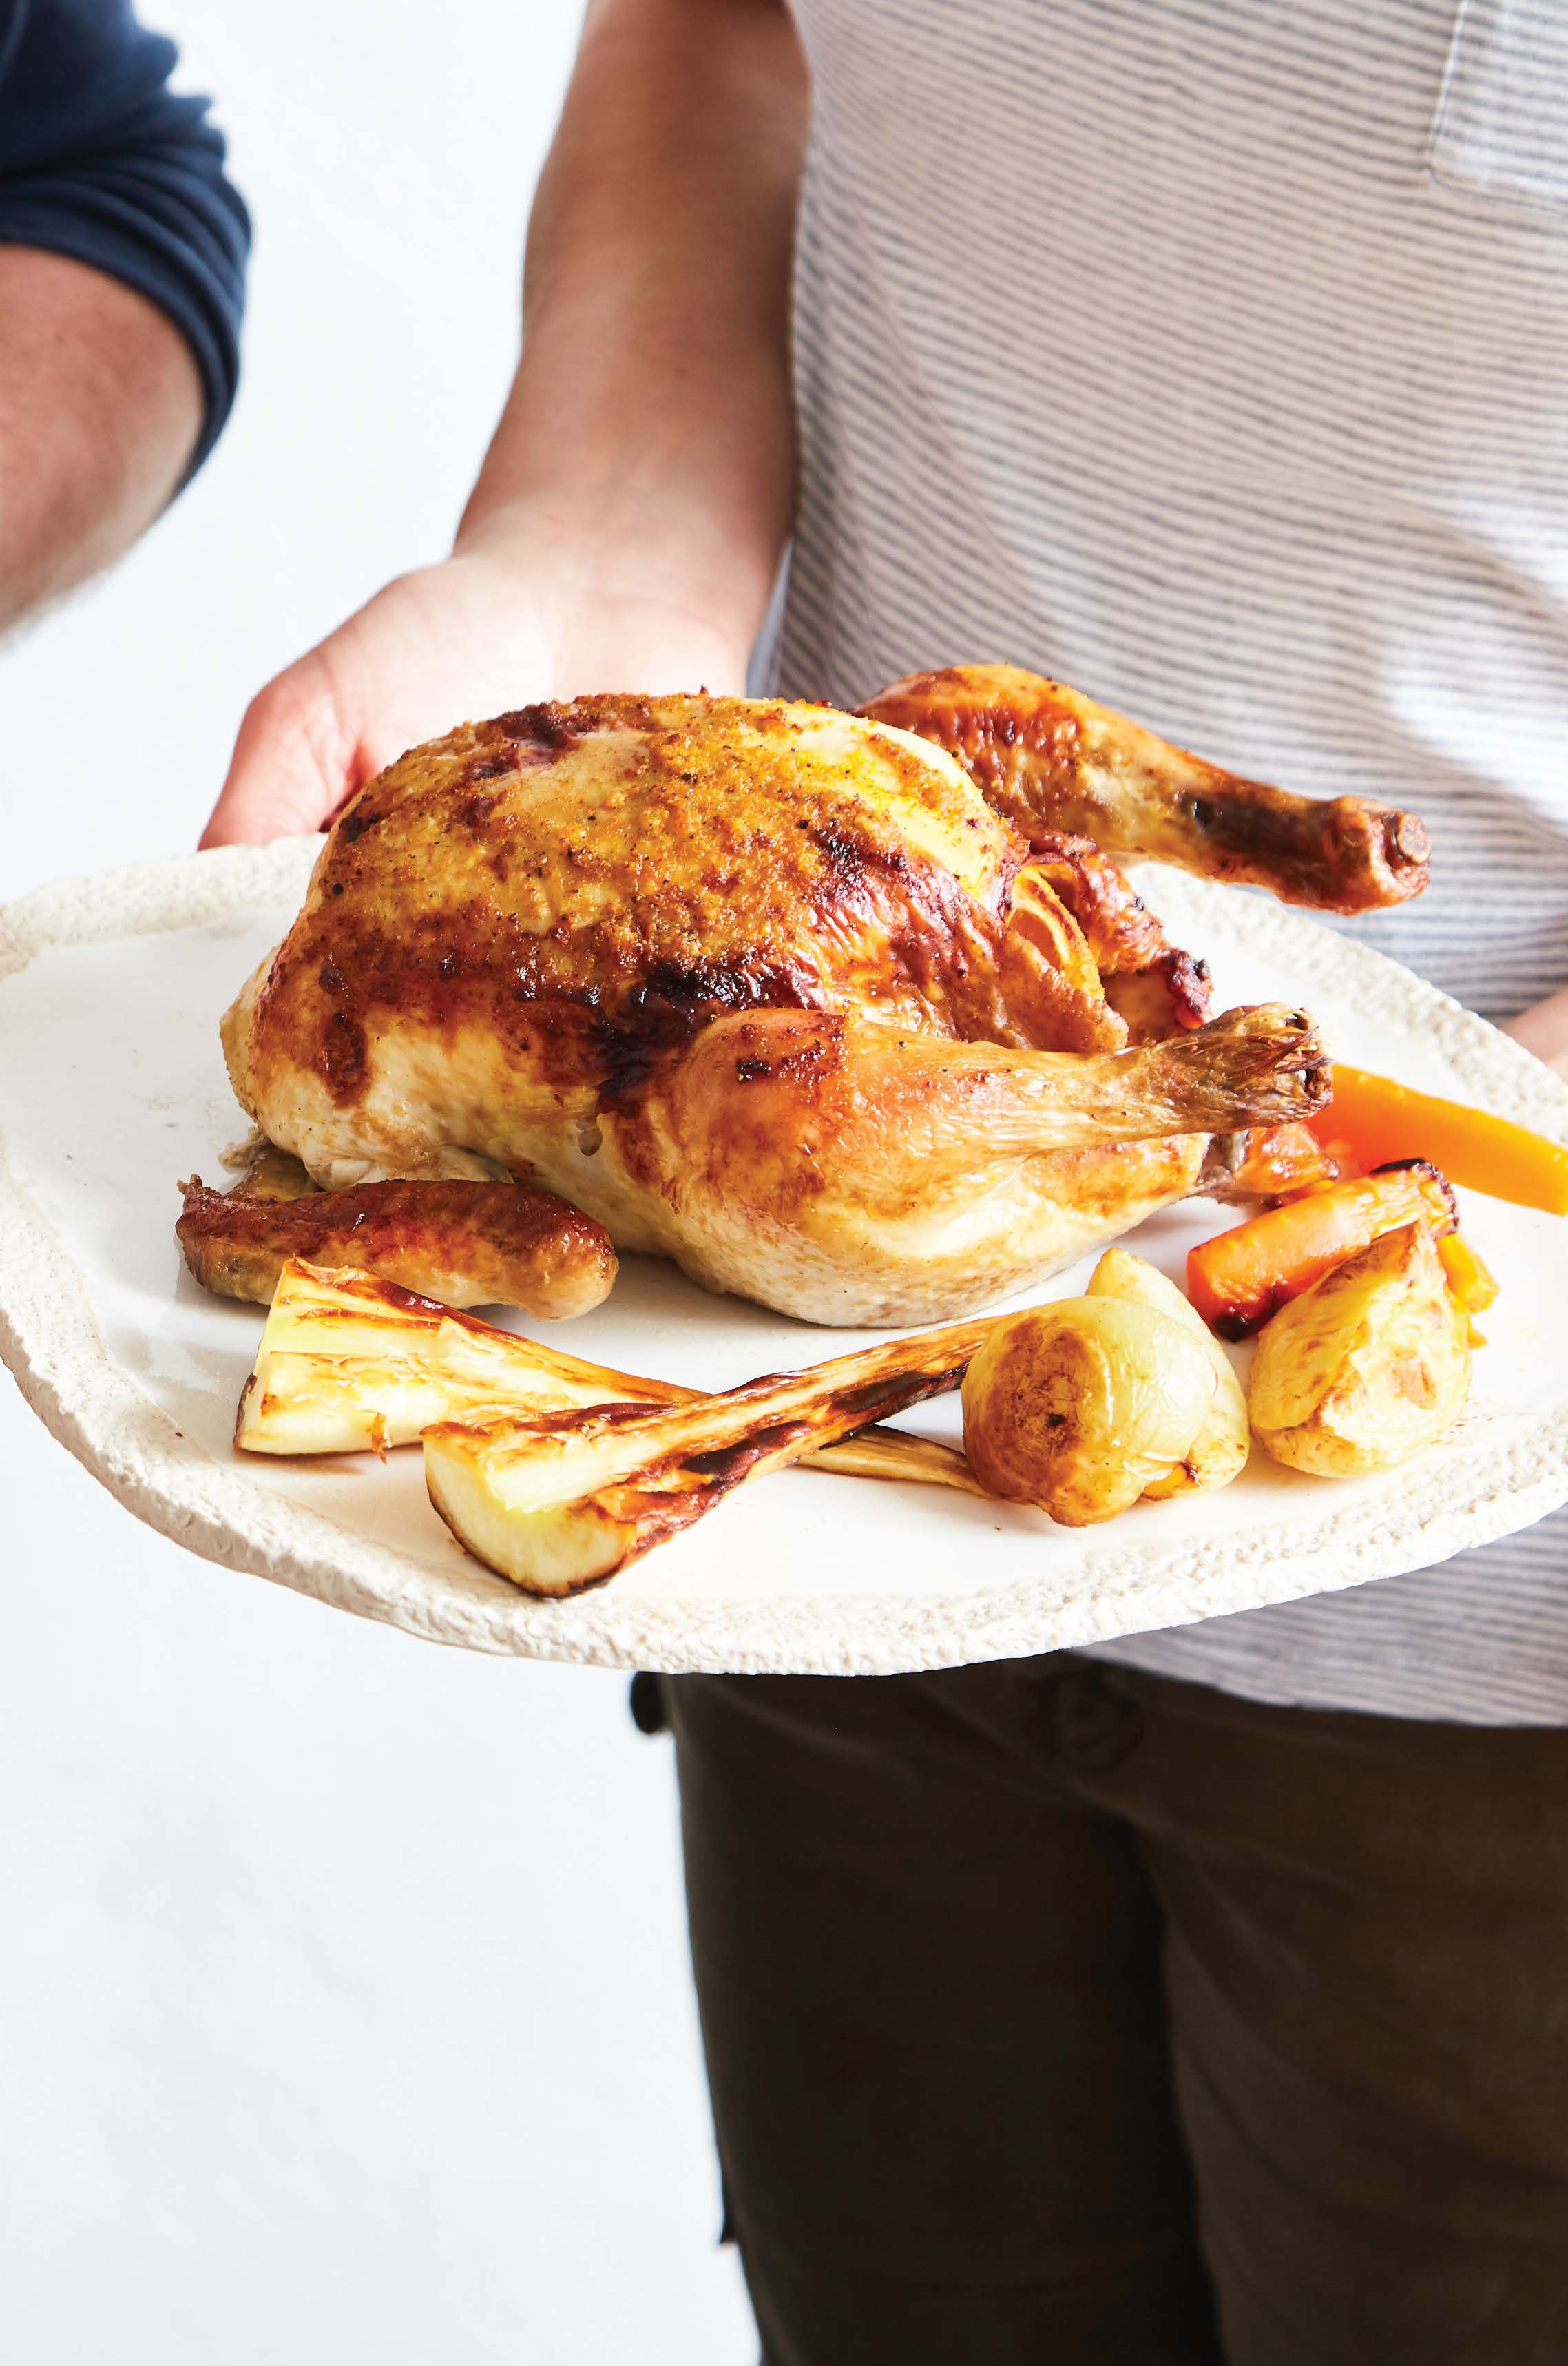 Roast chicken with orange butter rub, roasted vegetables and creamy gravy